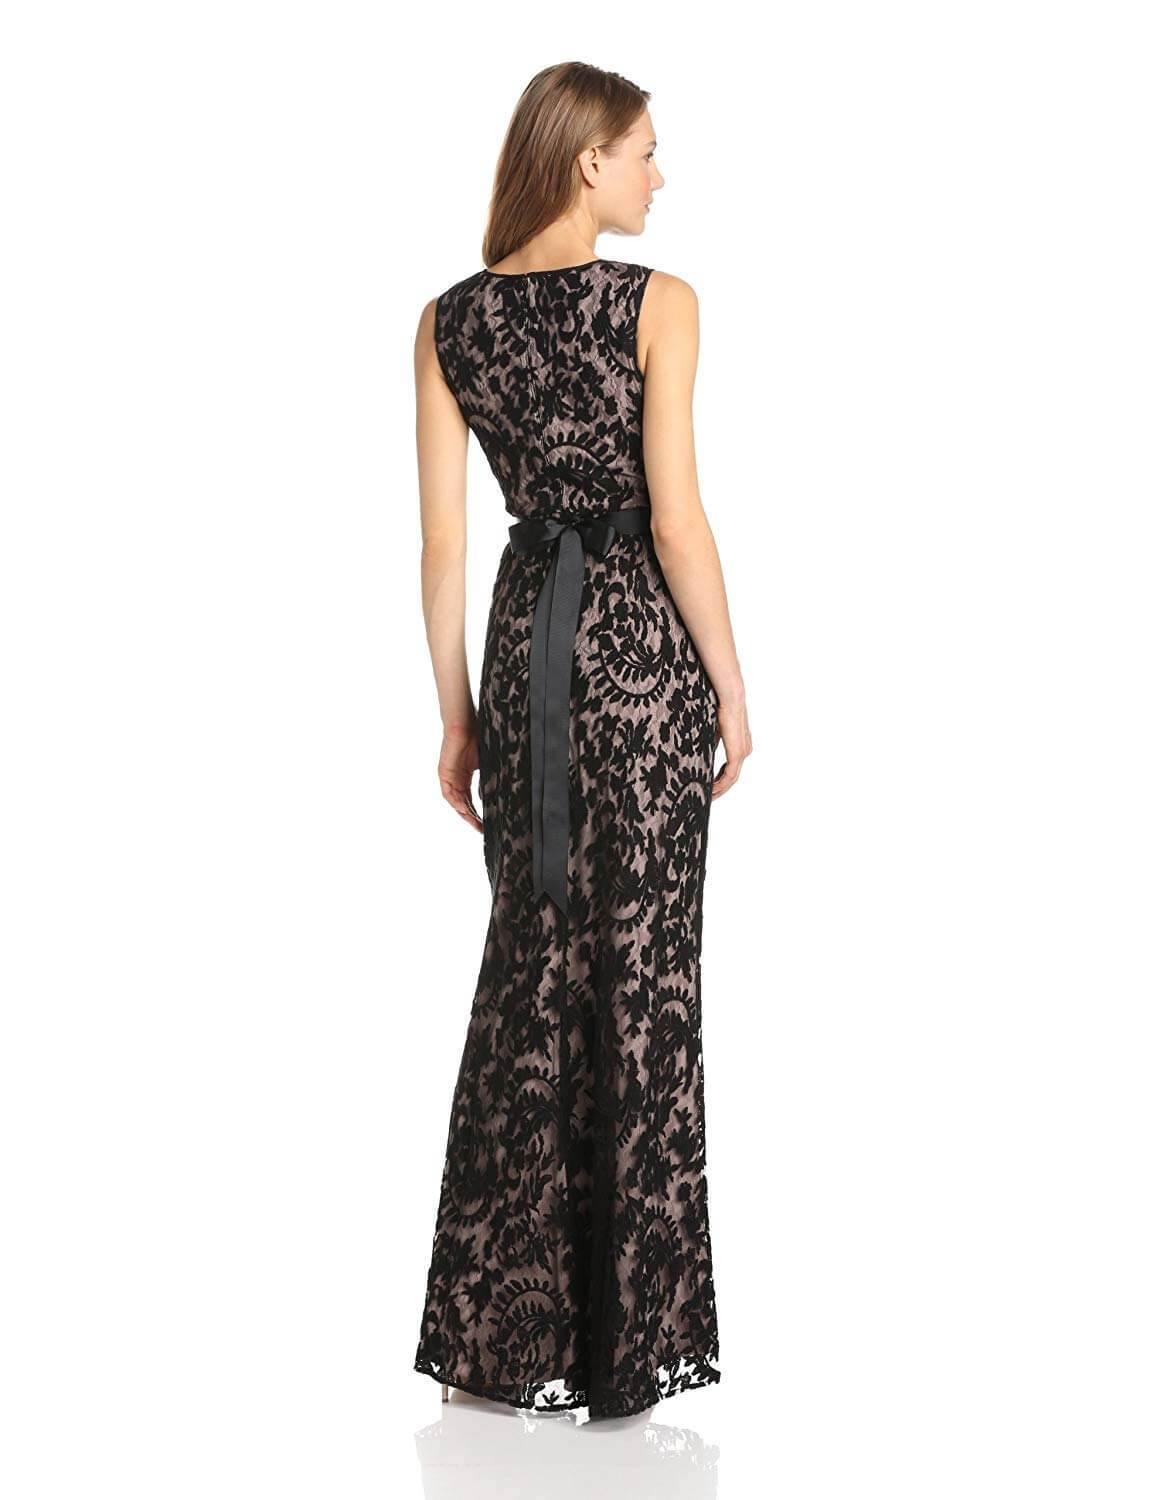 Adrianna Papell Long Formal Sleeveless Lace Dress - The Dress Outlet Adrianna Papell